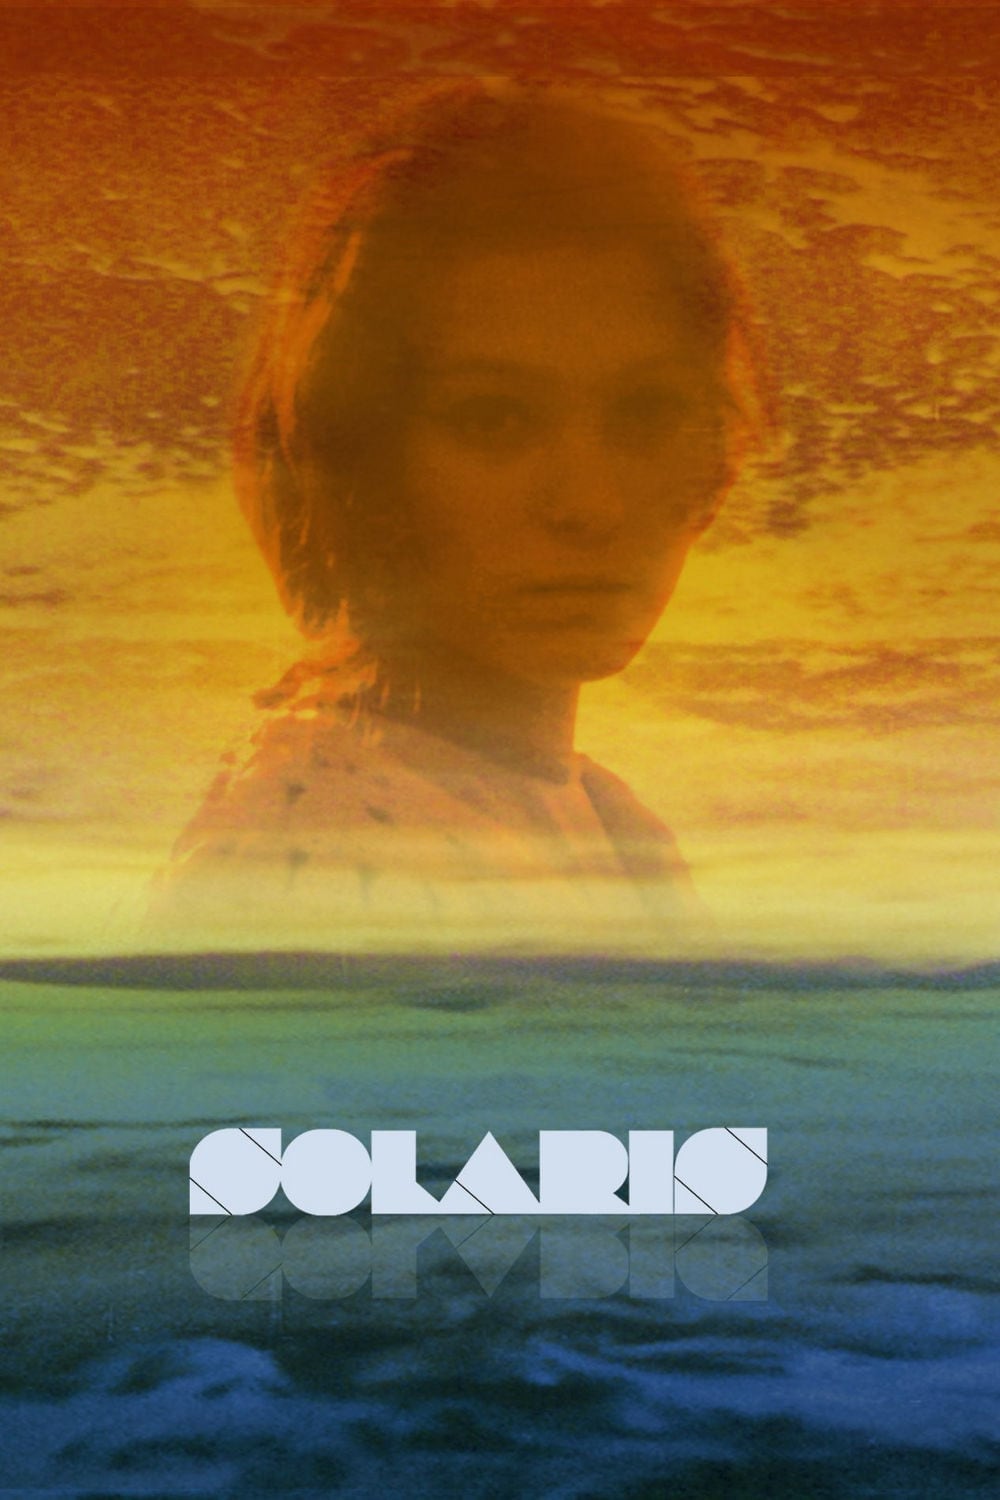 Poster for the movie "Solaris"